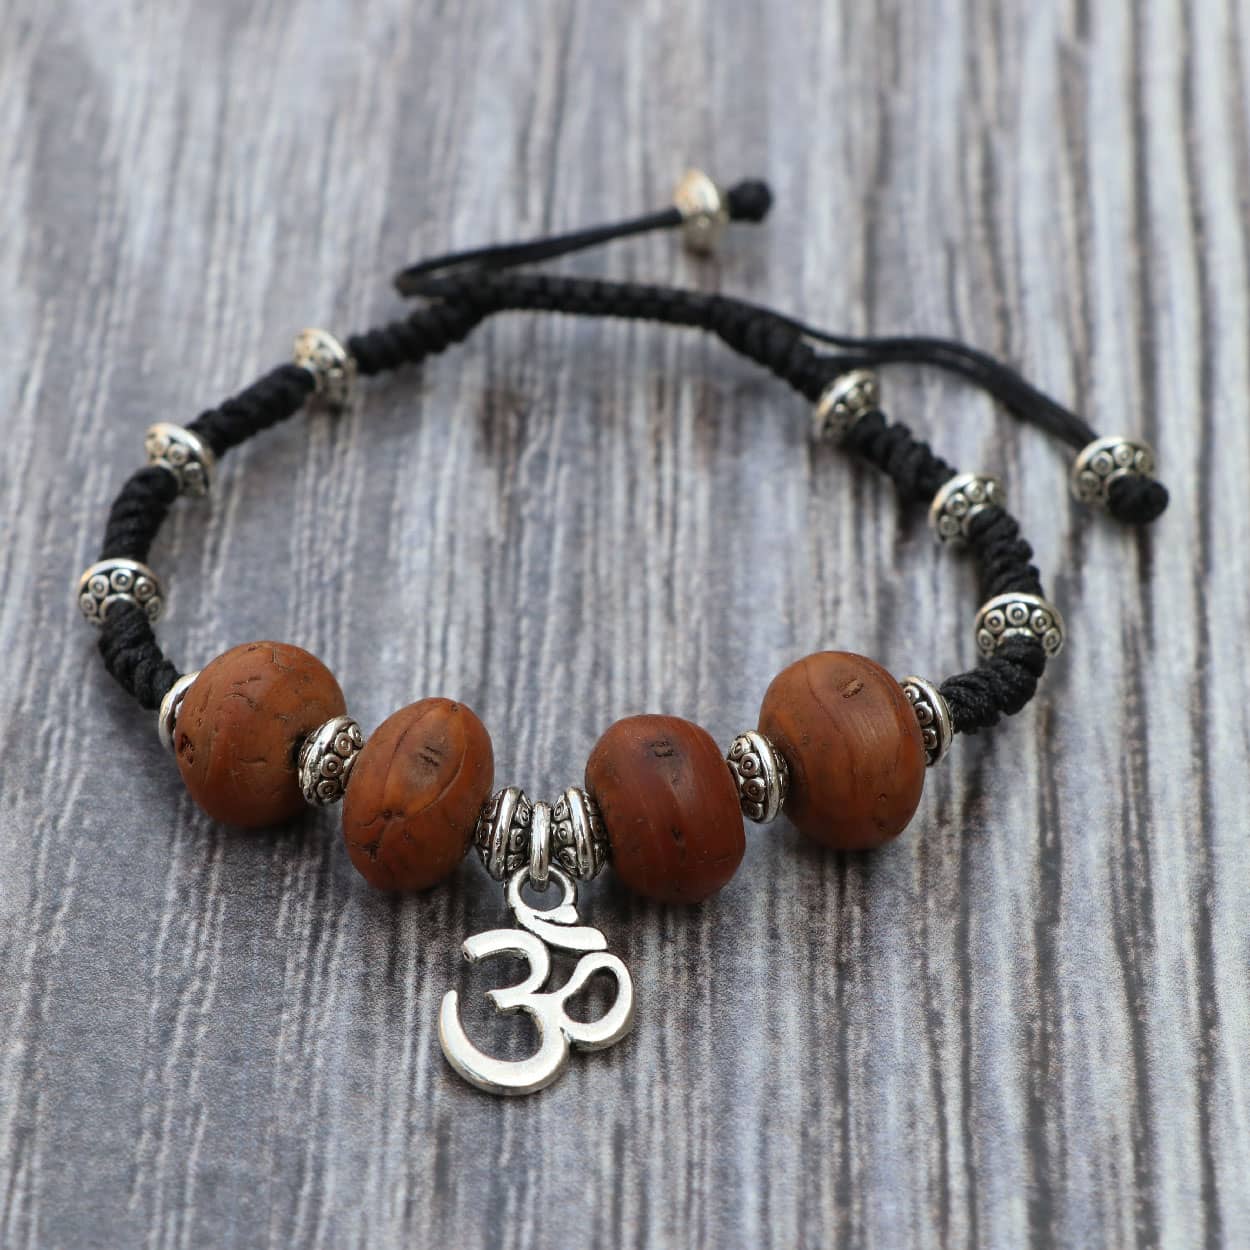 Buy the best Hindu Om Hand Knotted Wrist Mala With Bodhi Seed